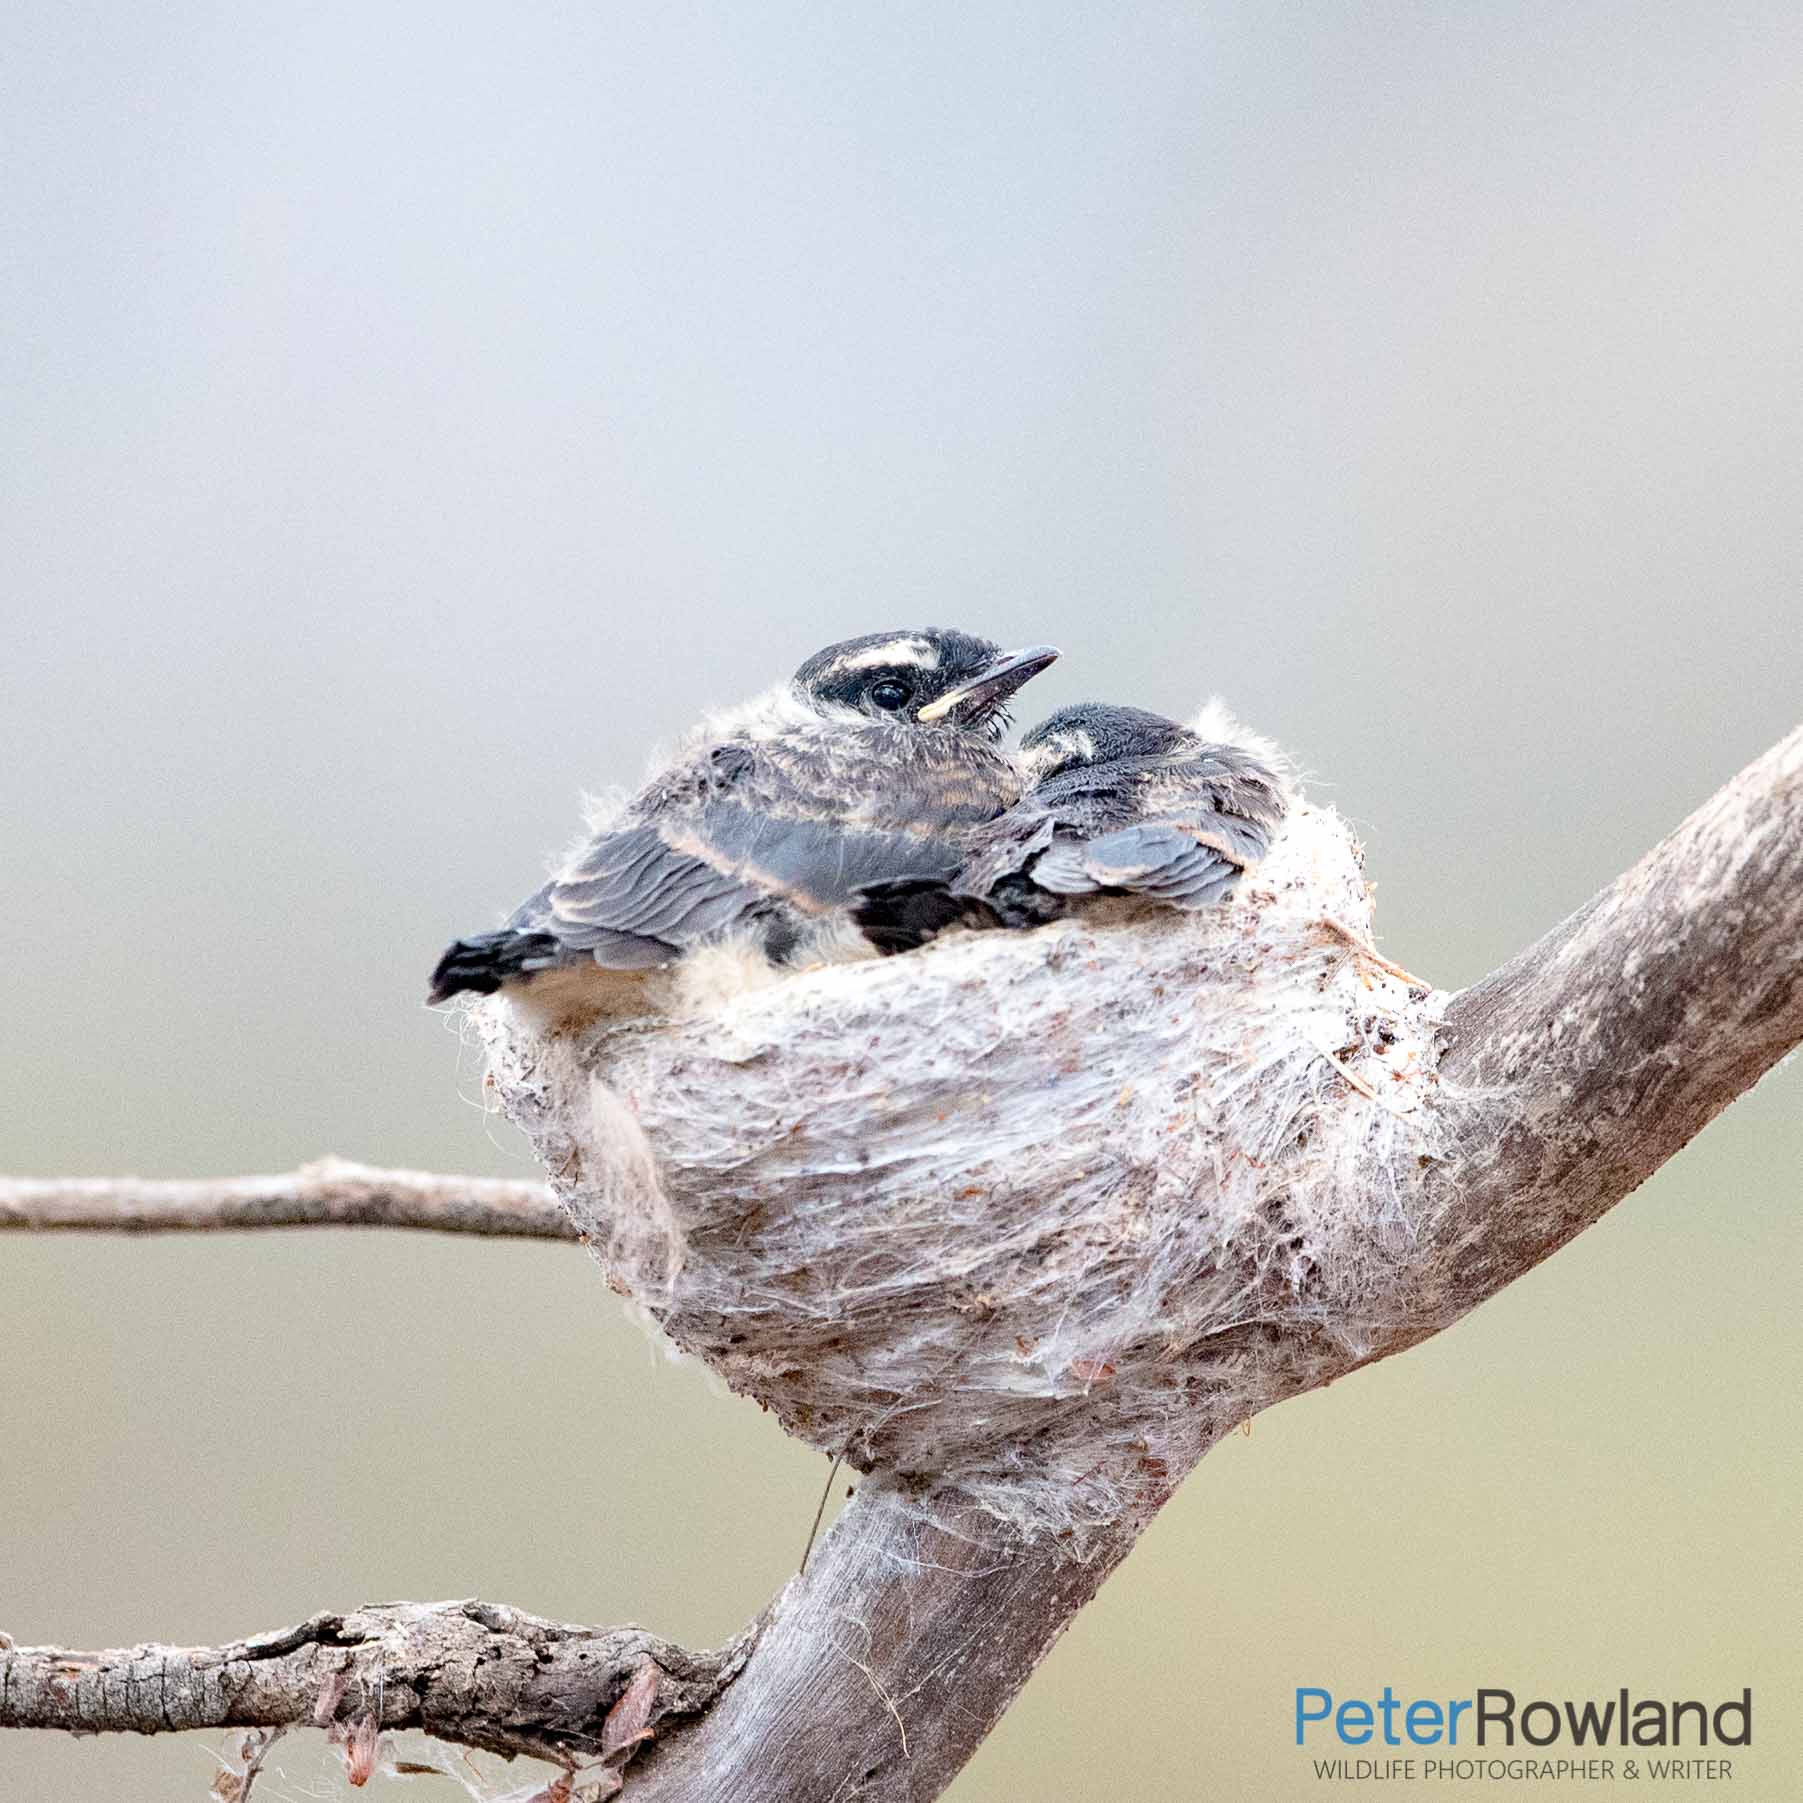 A Willie Wagtail nest with two nestlings